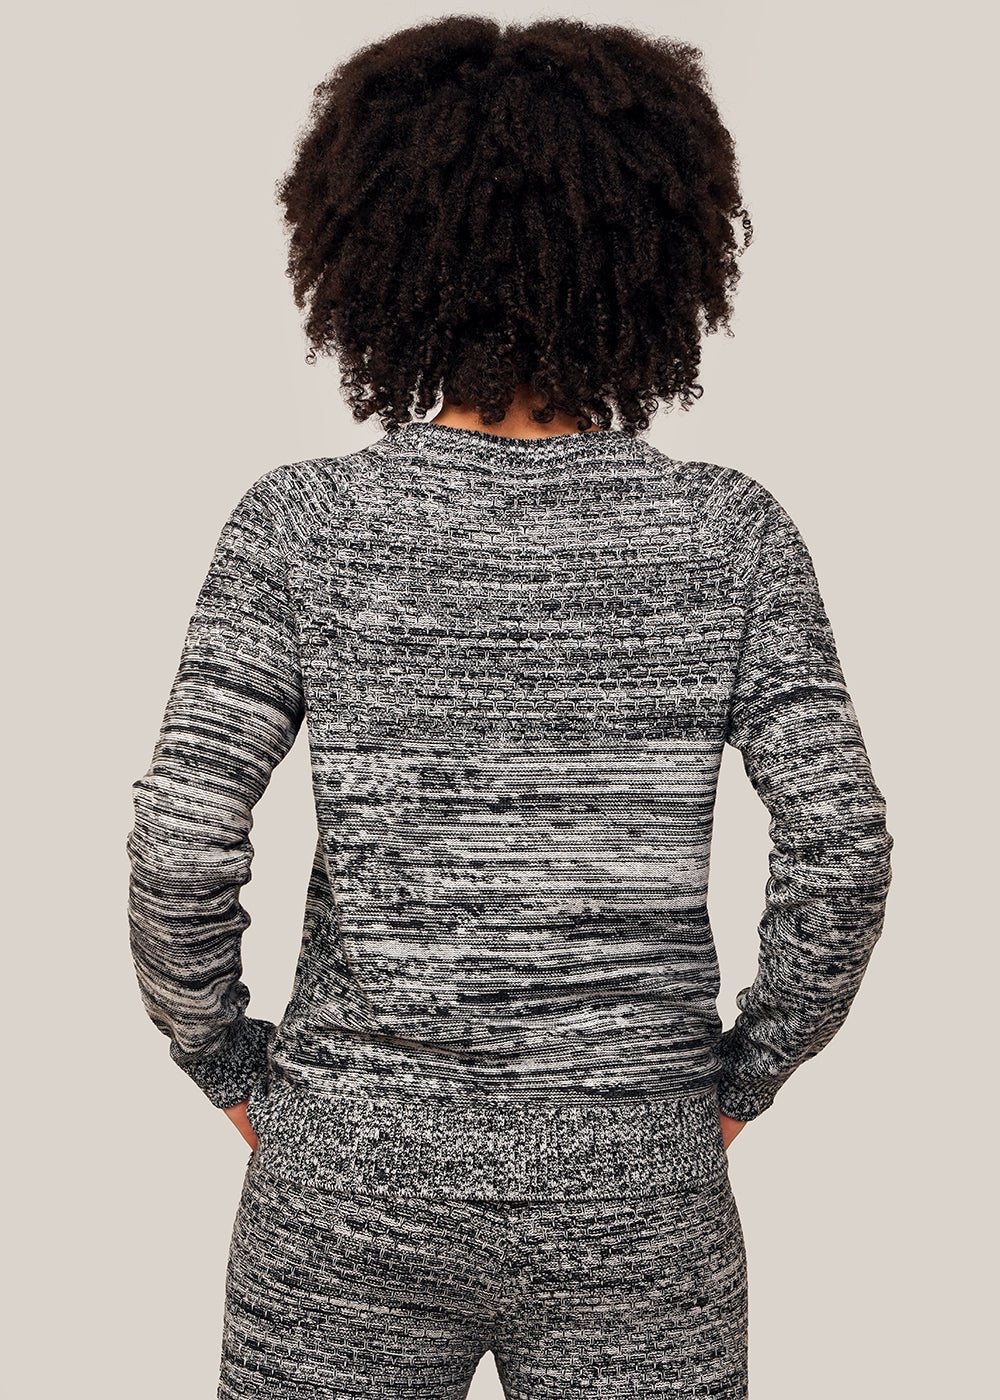 Giu Giu White Noise Space Suit Sweater - New Classics Studios Sustainable Ethical Fashion Canada